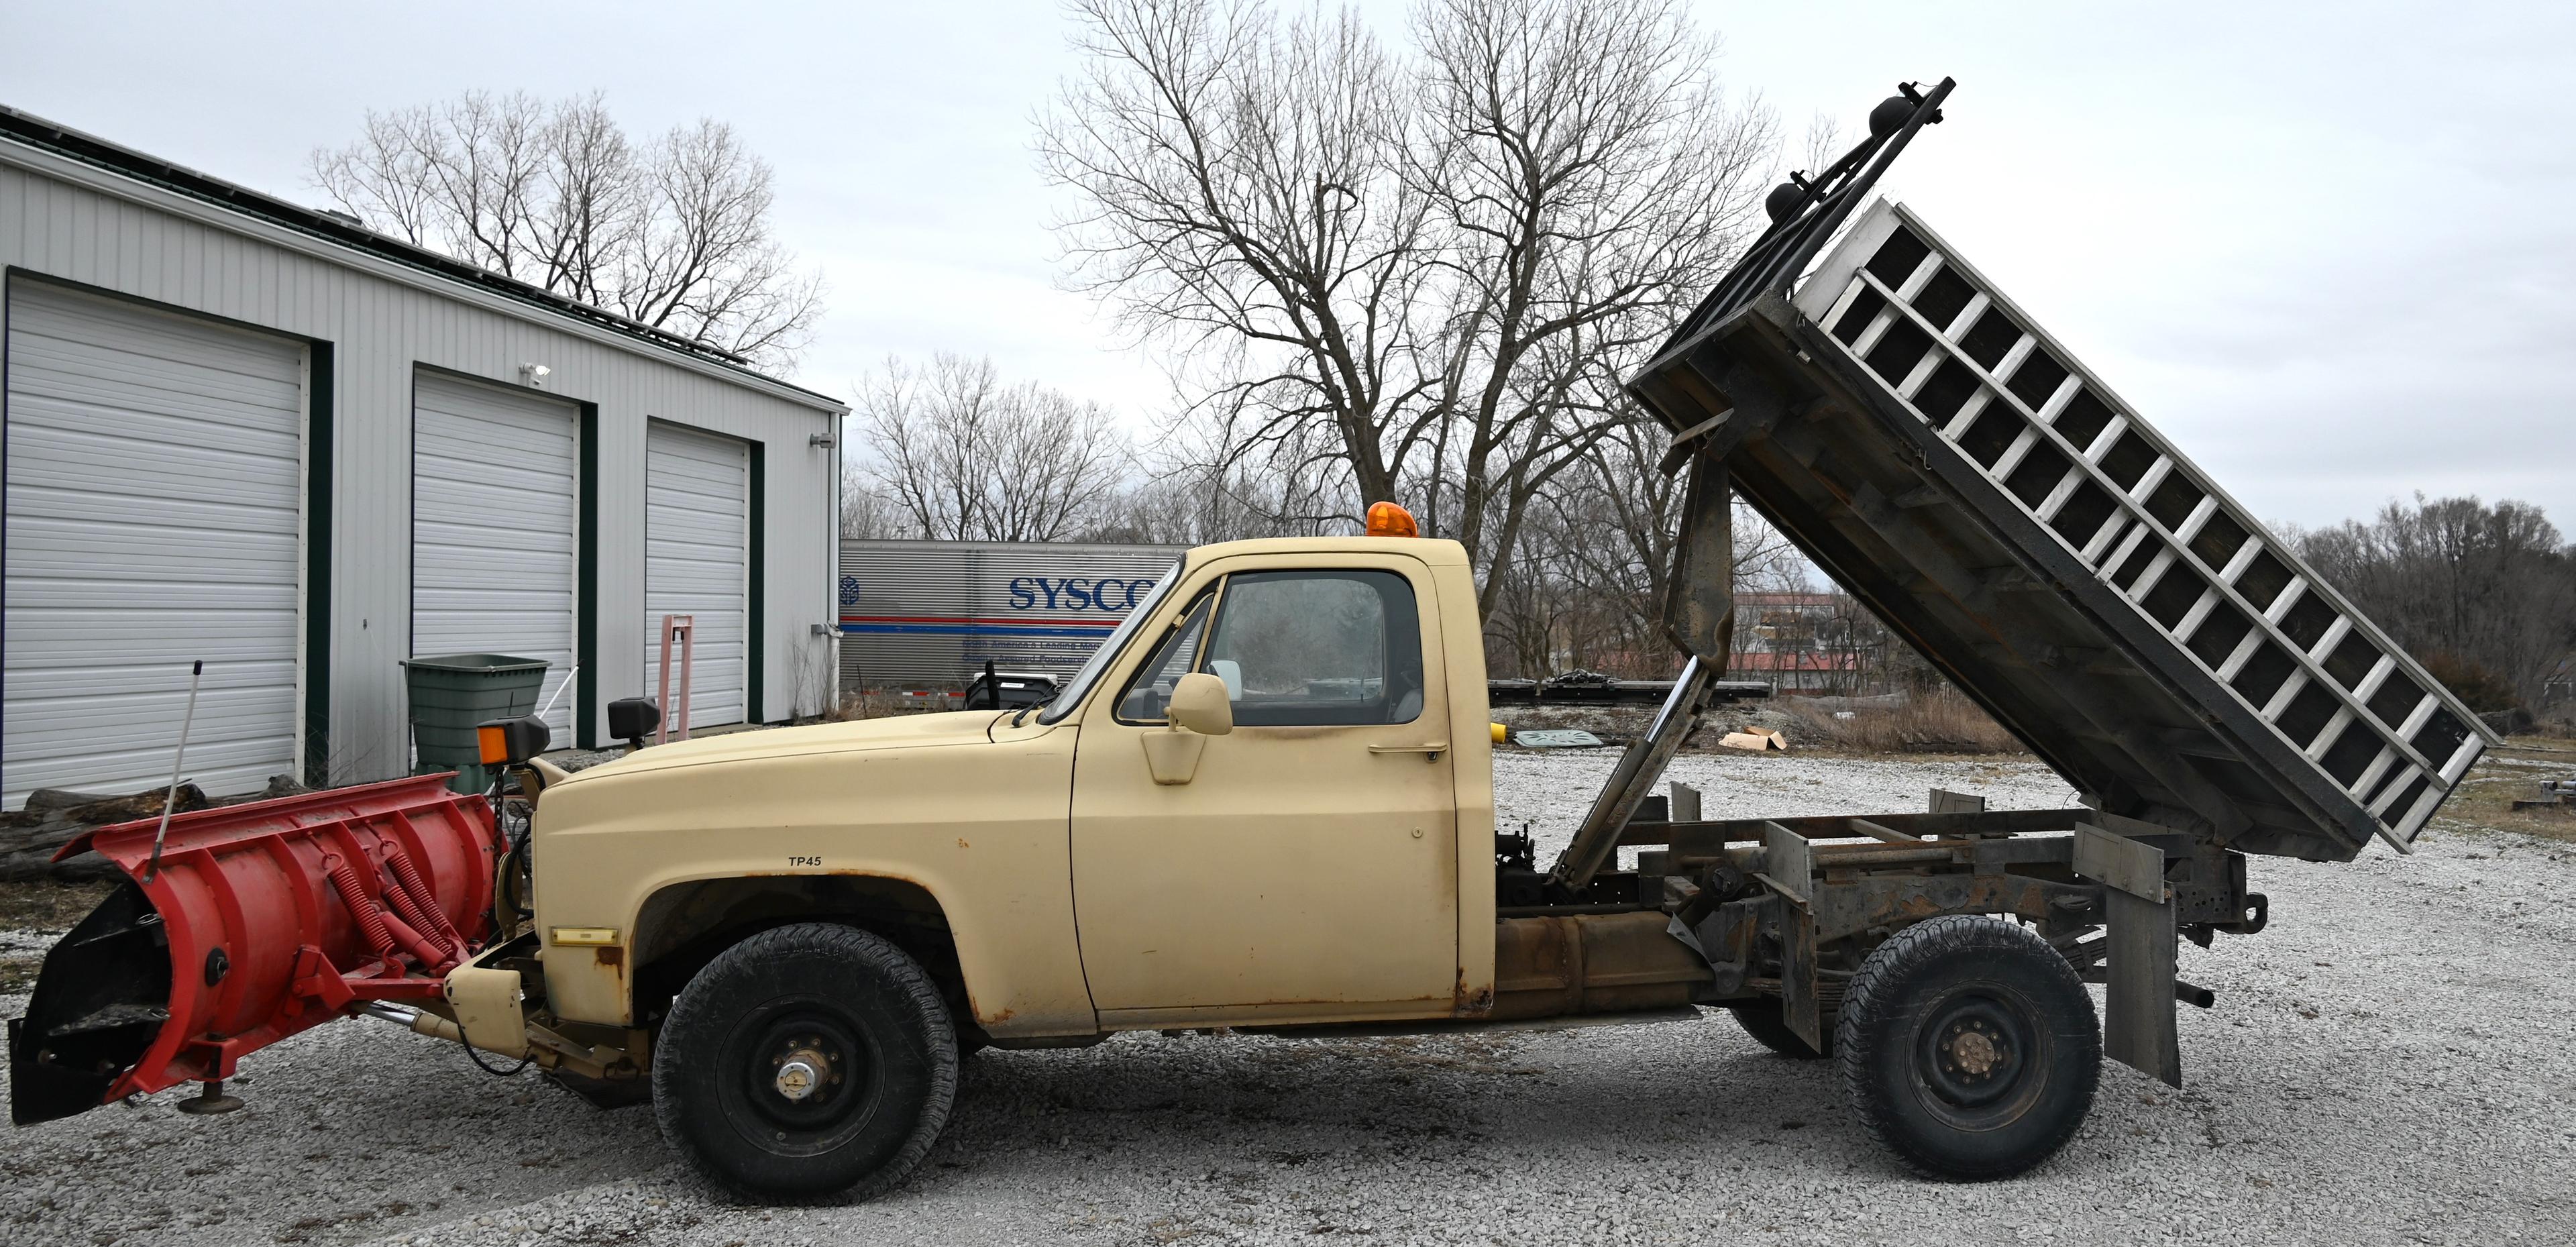 1986 Chevrolet CD-30903 Military CUCV 3600Lb Payload Pick-up Truck with snow plow